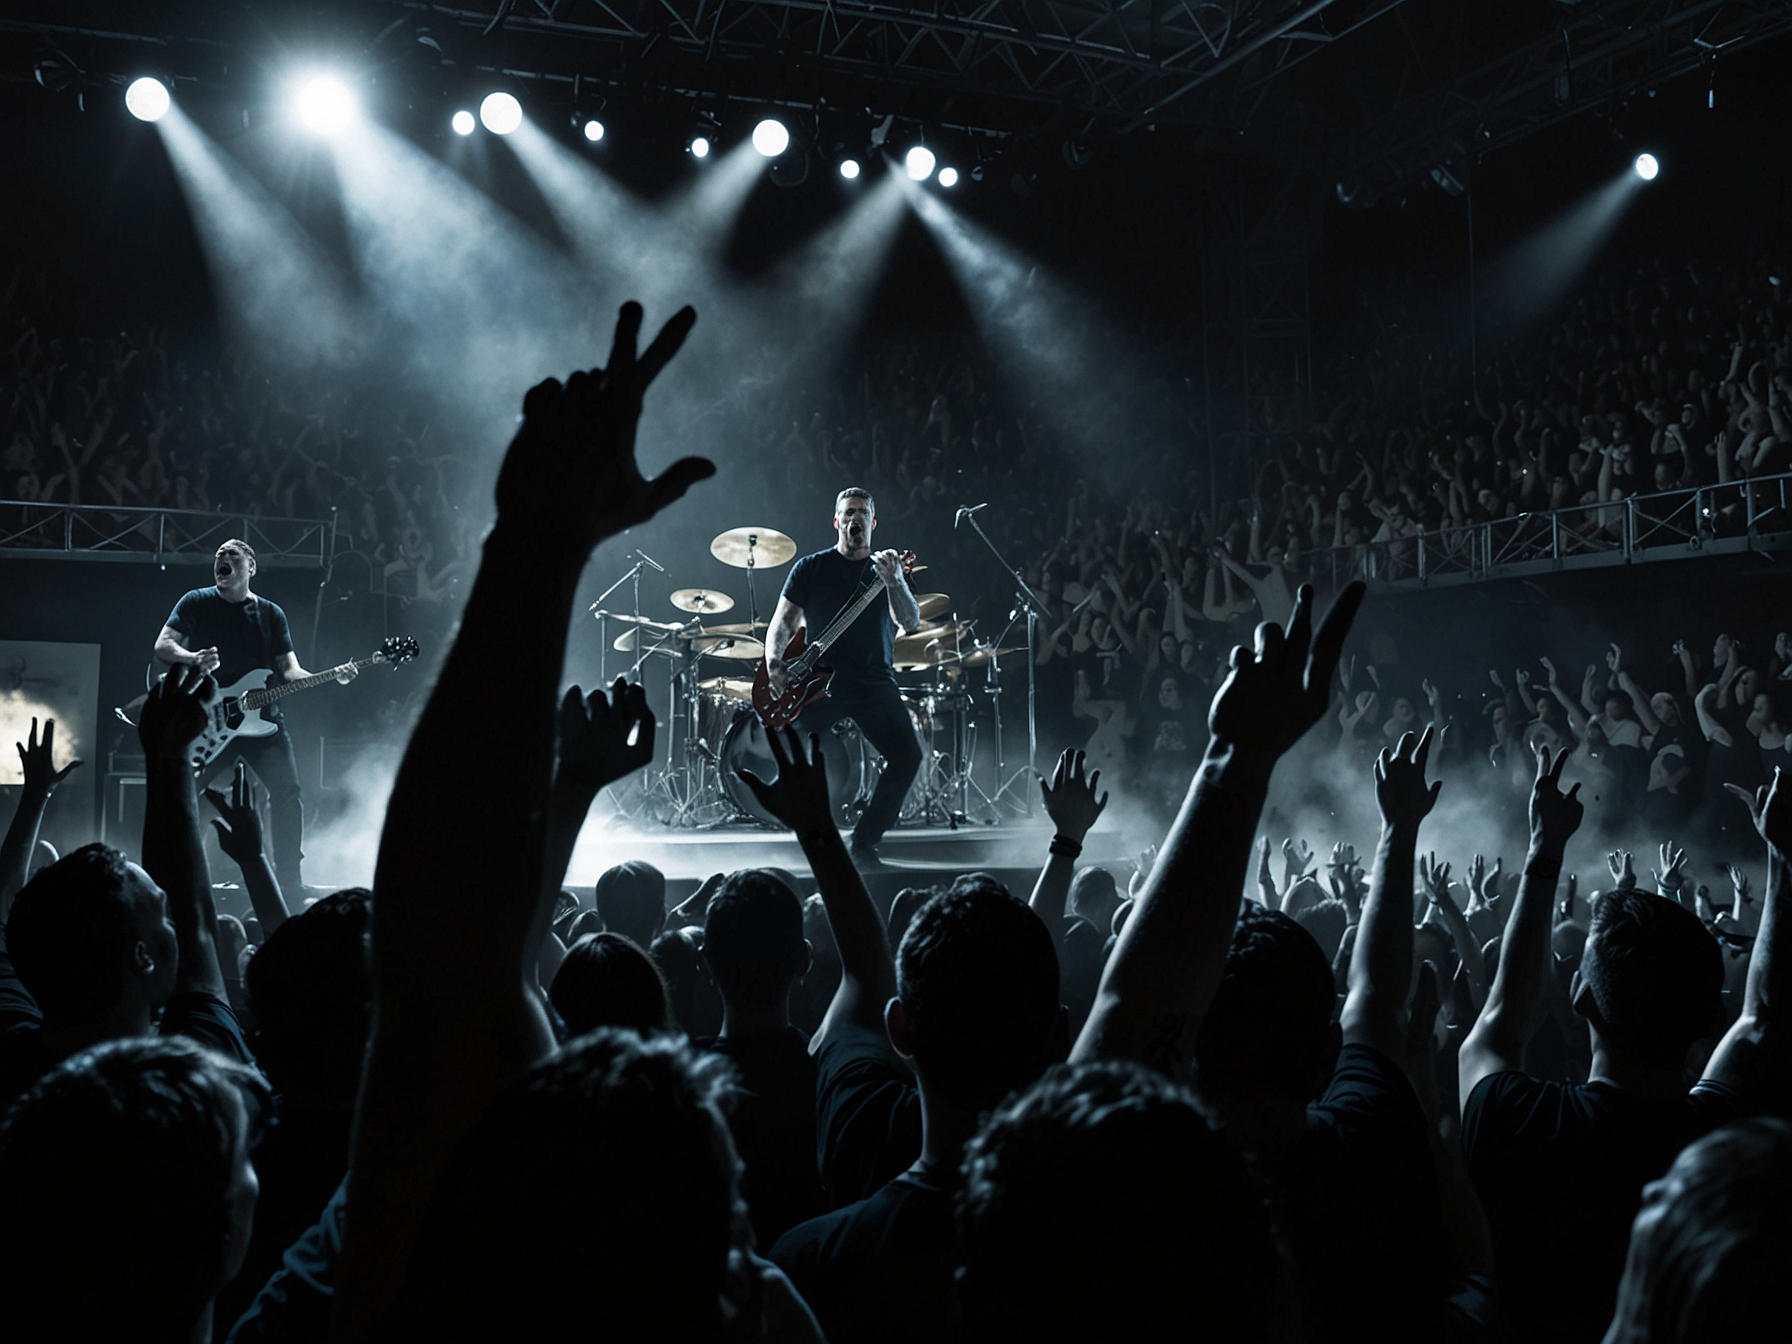 The band Parkway Drive performing on stage, capturing their intense energy and raw aggression, as they perform tracks from their impactful album Deep Blue.